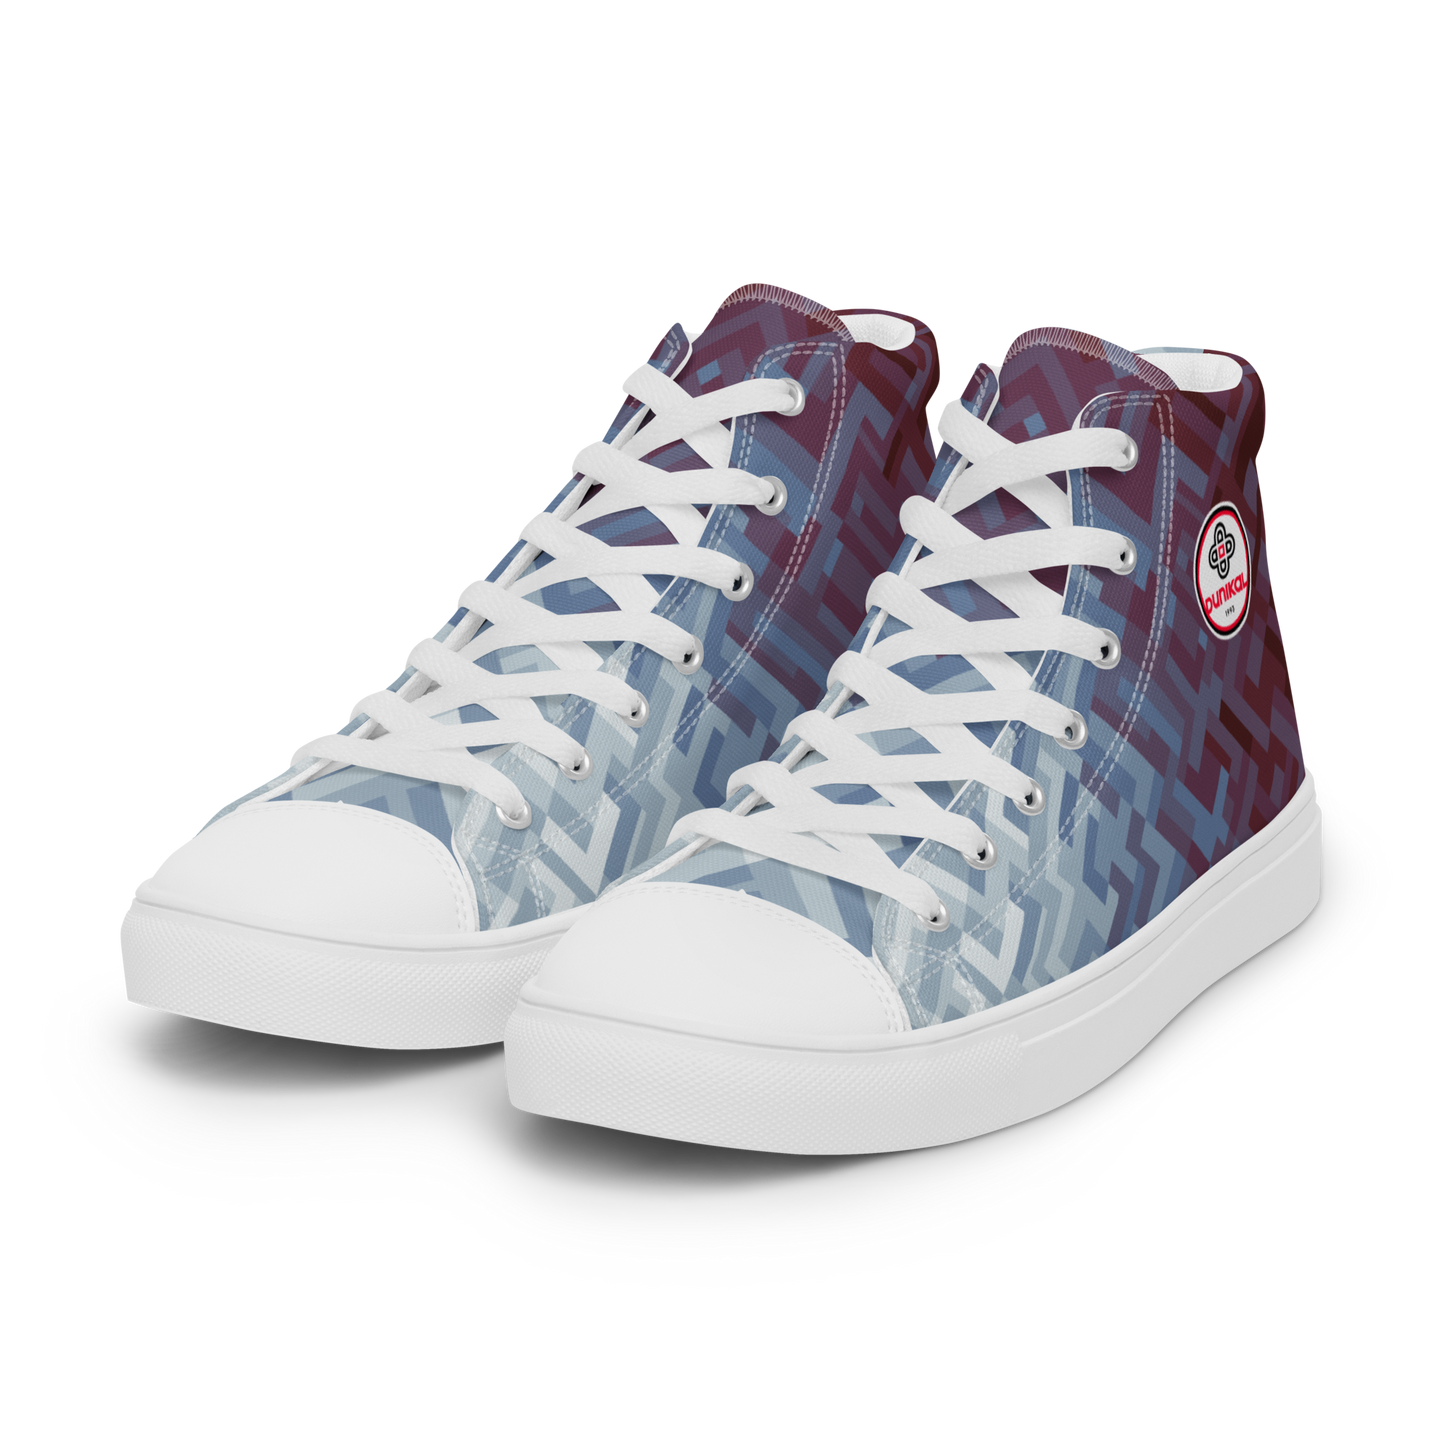 Men's Canvas Sneakers ❯ Polygon Gradient ❯ Chasse-Galerie